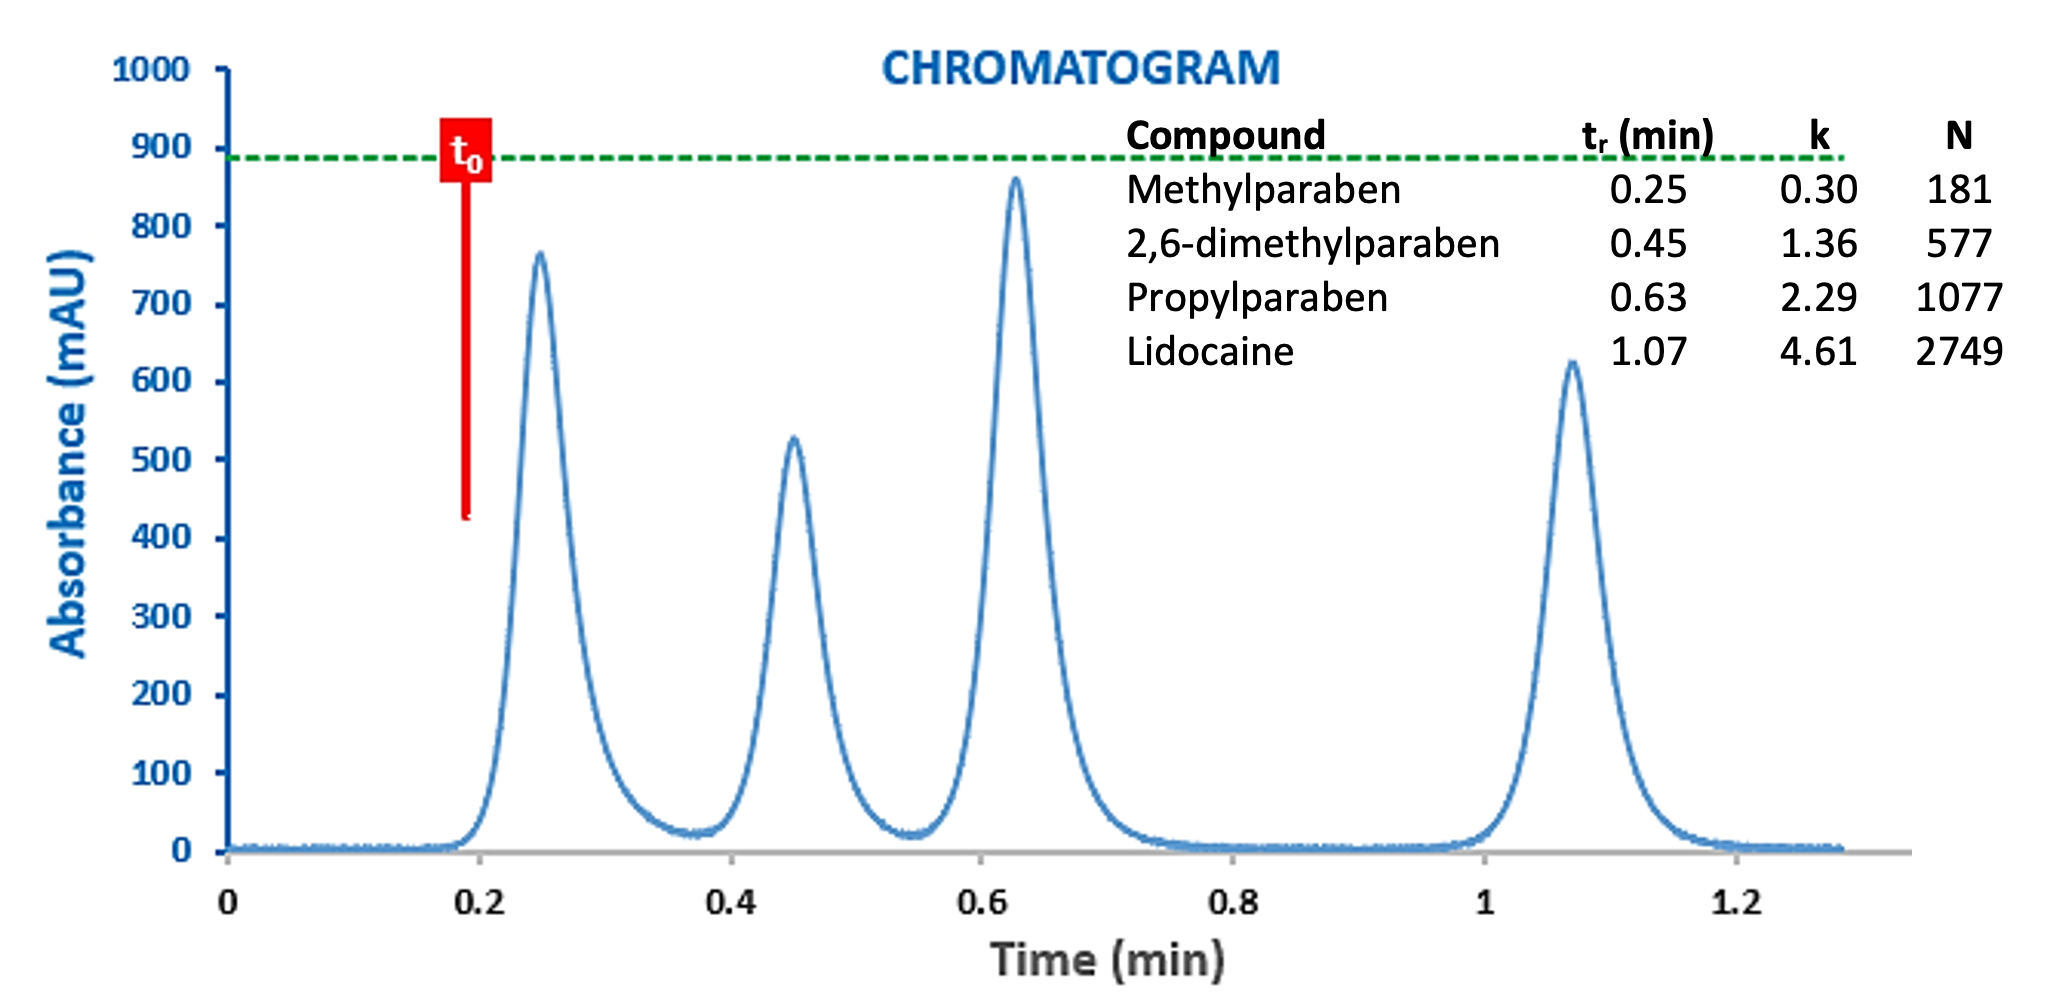 Figure 9: Chromatograms for the separation of a Lidocaine Preparation obtained with a time constant of 100ms (top) 1000ms (bottom).